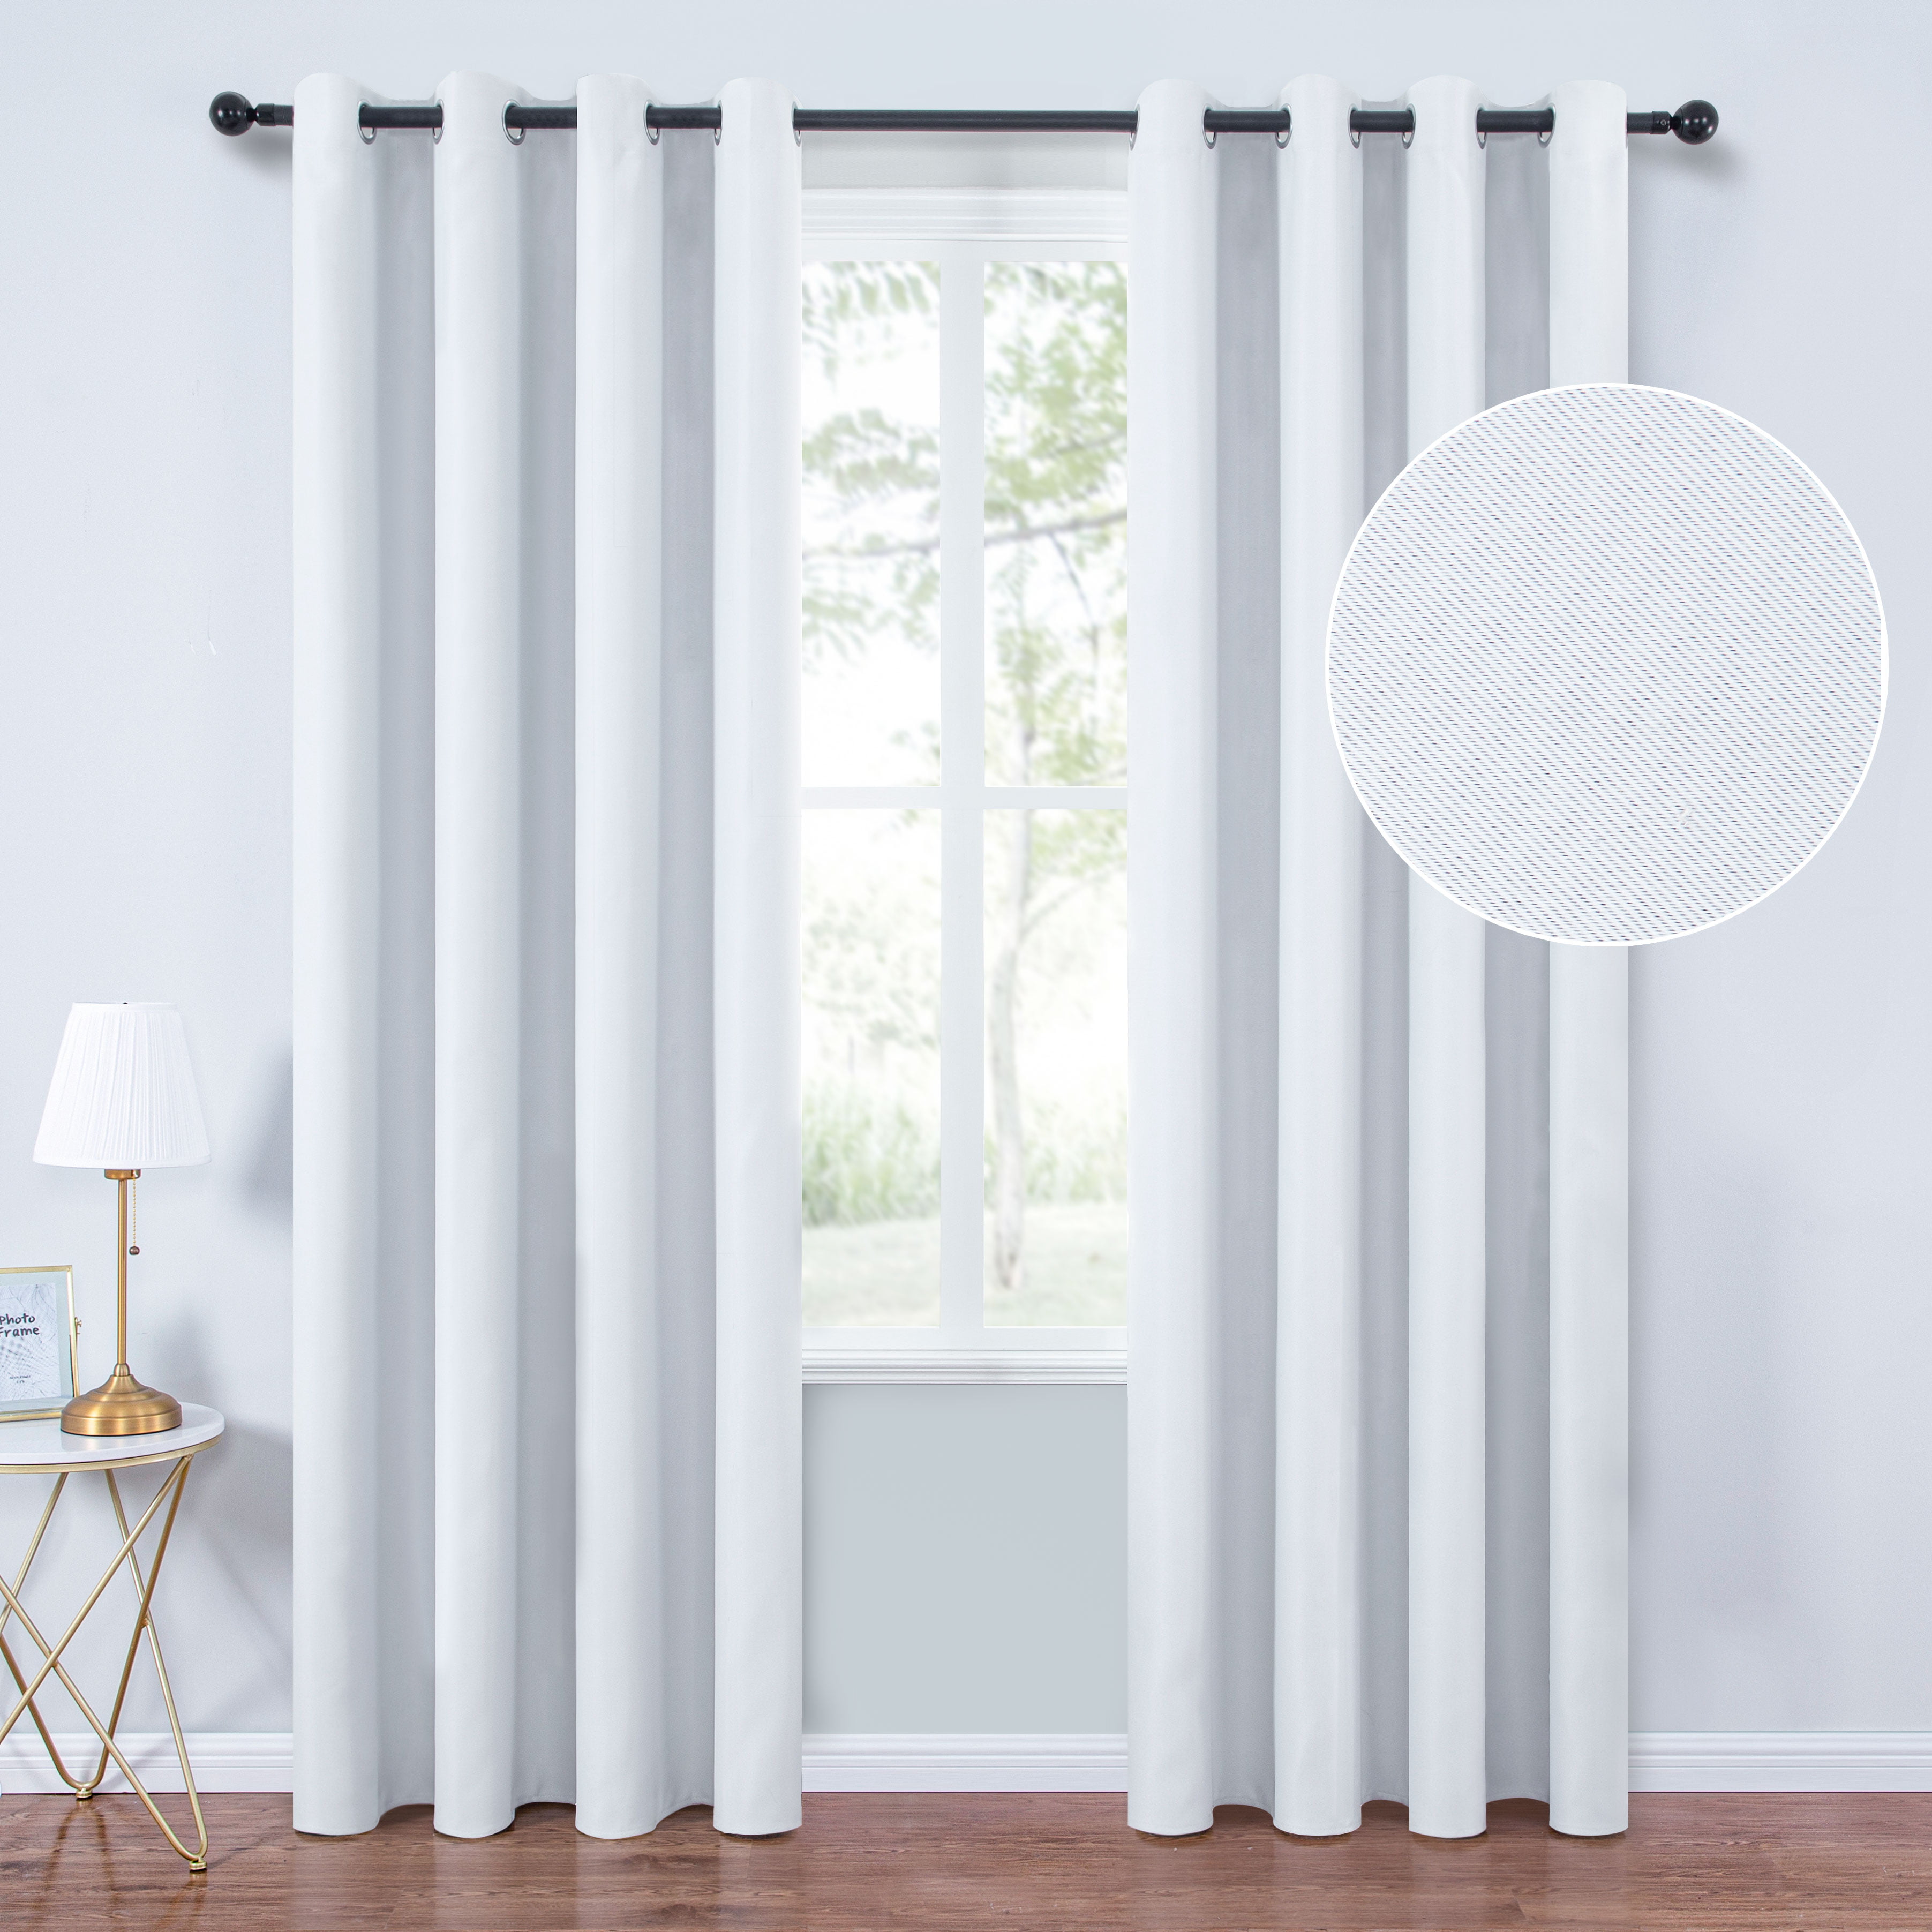 Topfinel Solid Room Darkening Grommet Polyester Curtains White 84 inch Window Curtains for